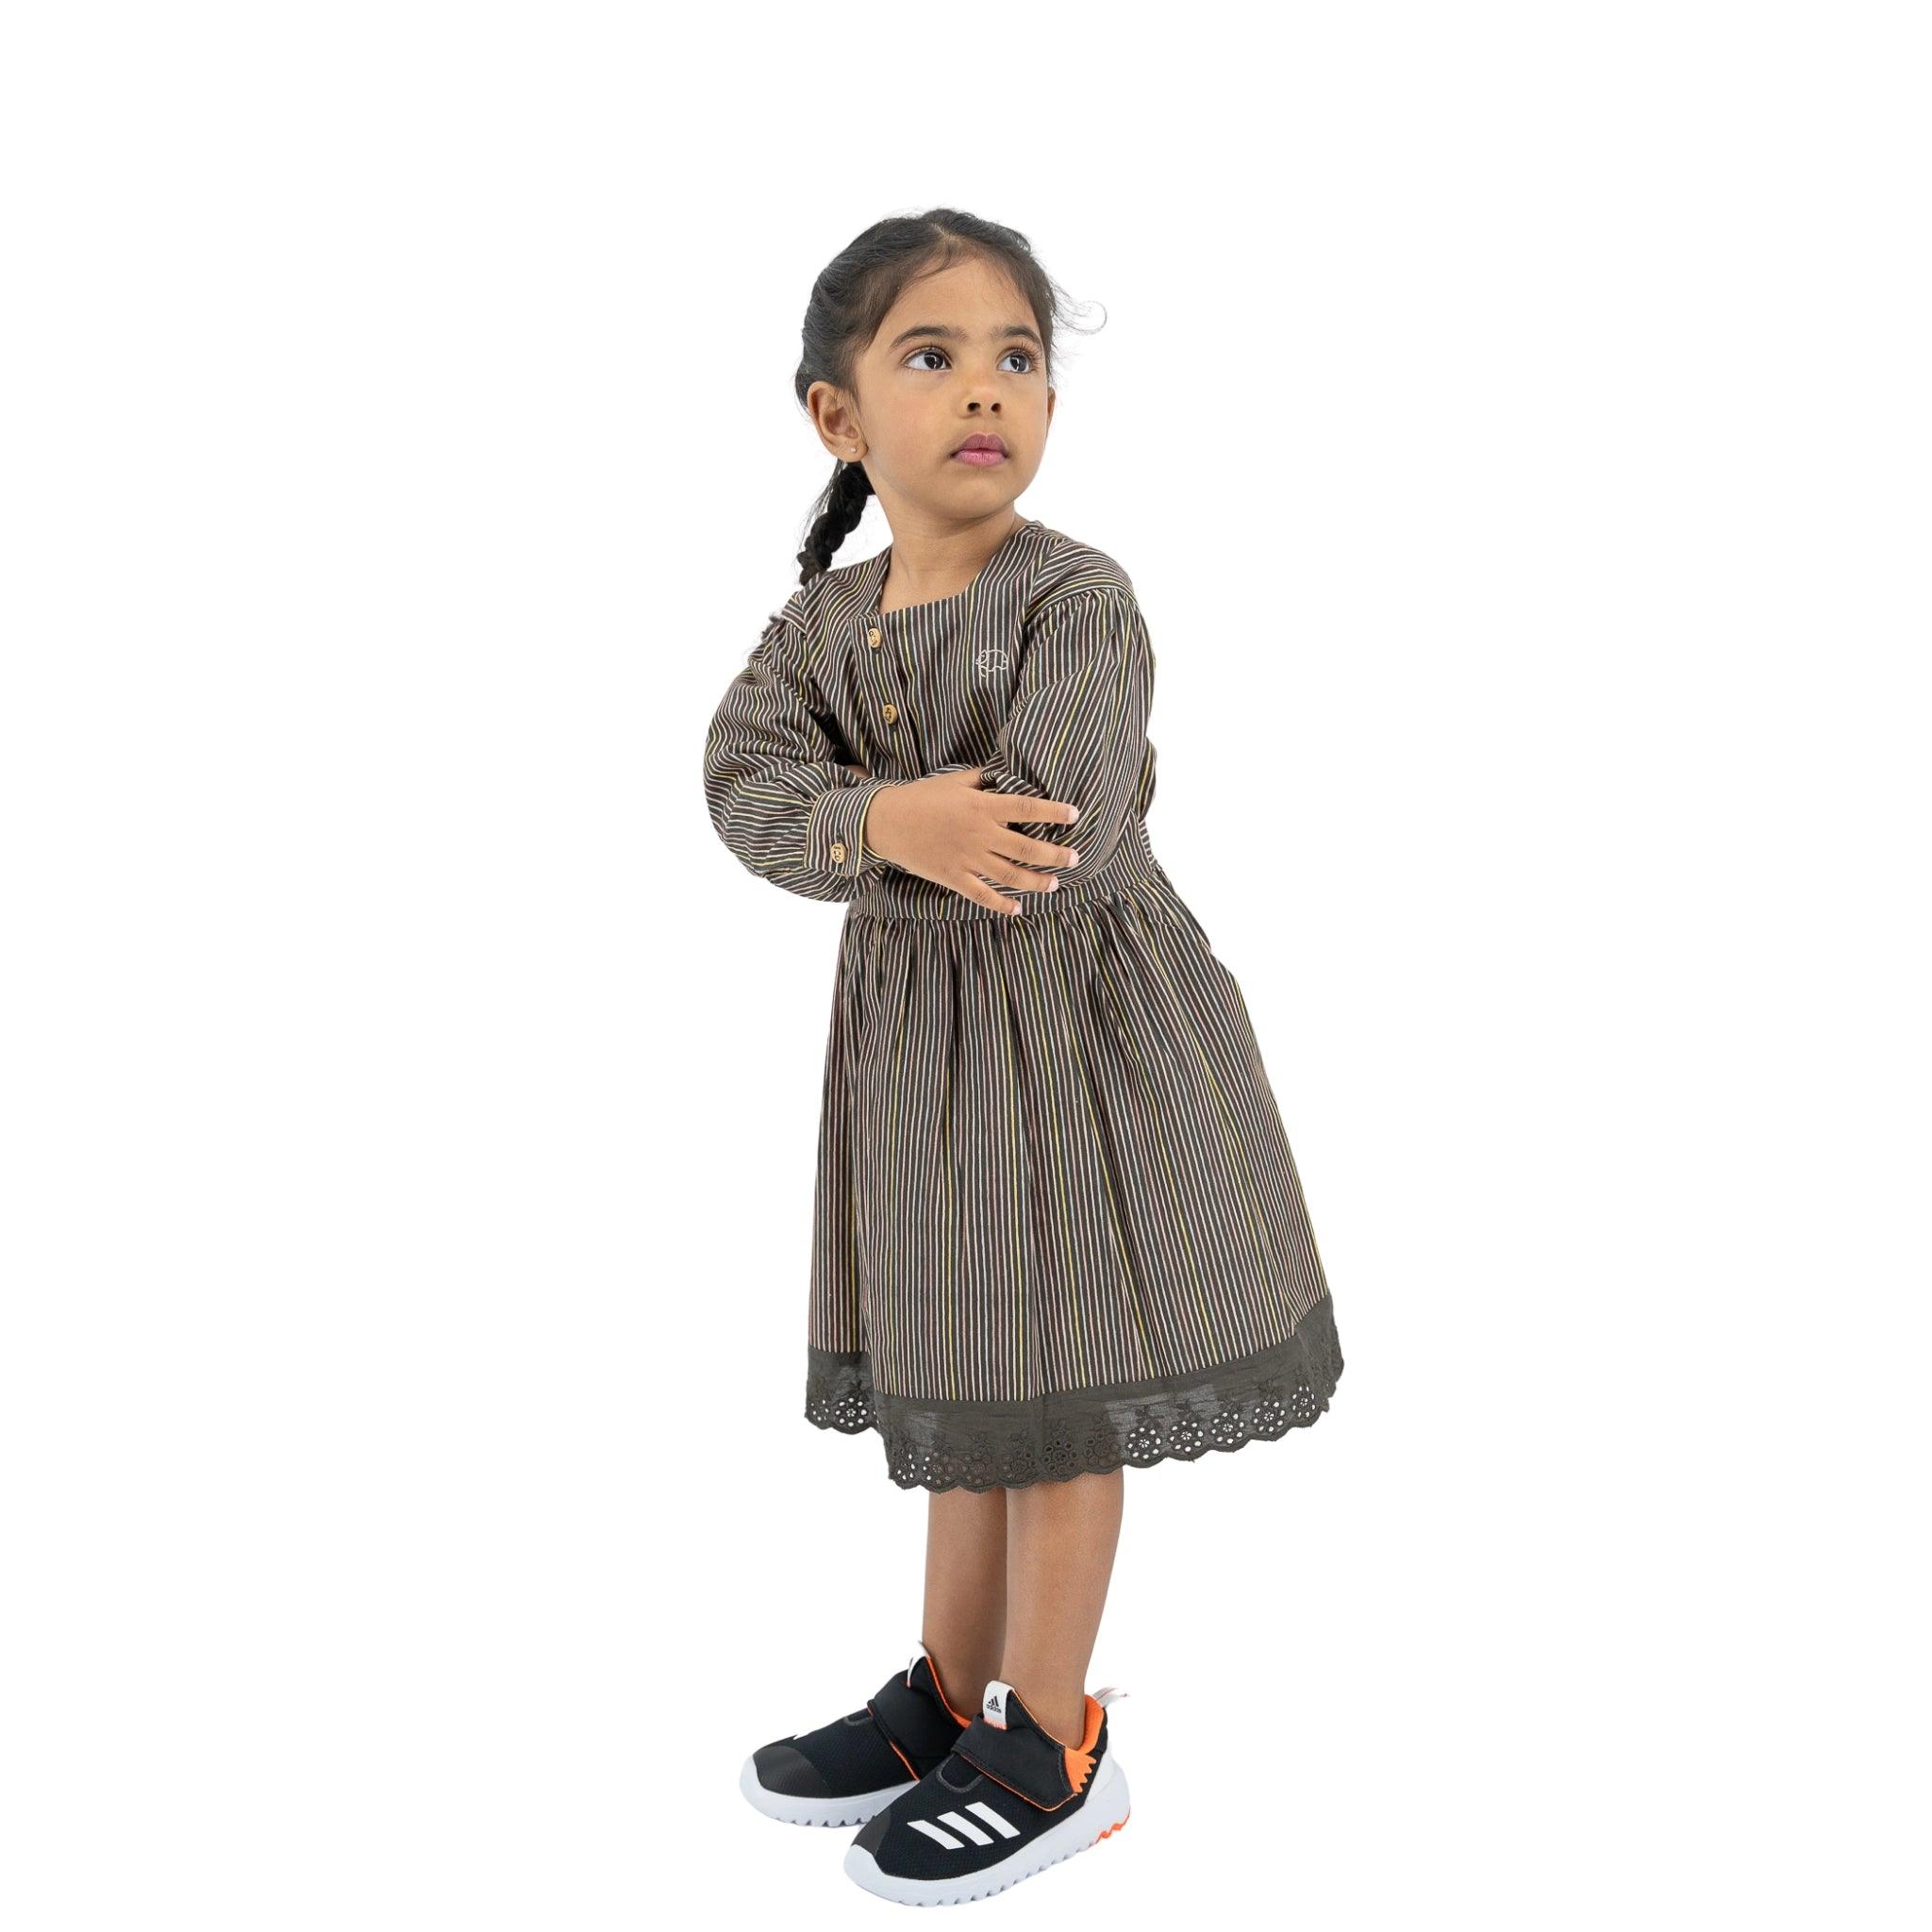 Young girl standing, wearing a Karee Black Striped Full sleeve Cotton Dress and sneakers, looking upwards to the left, isolated on a white background.